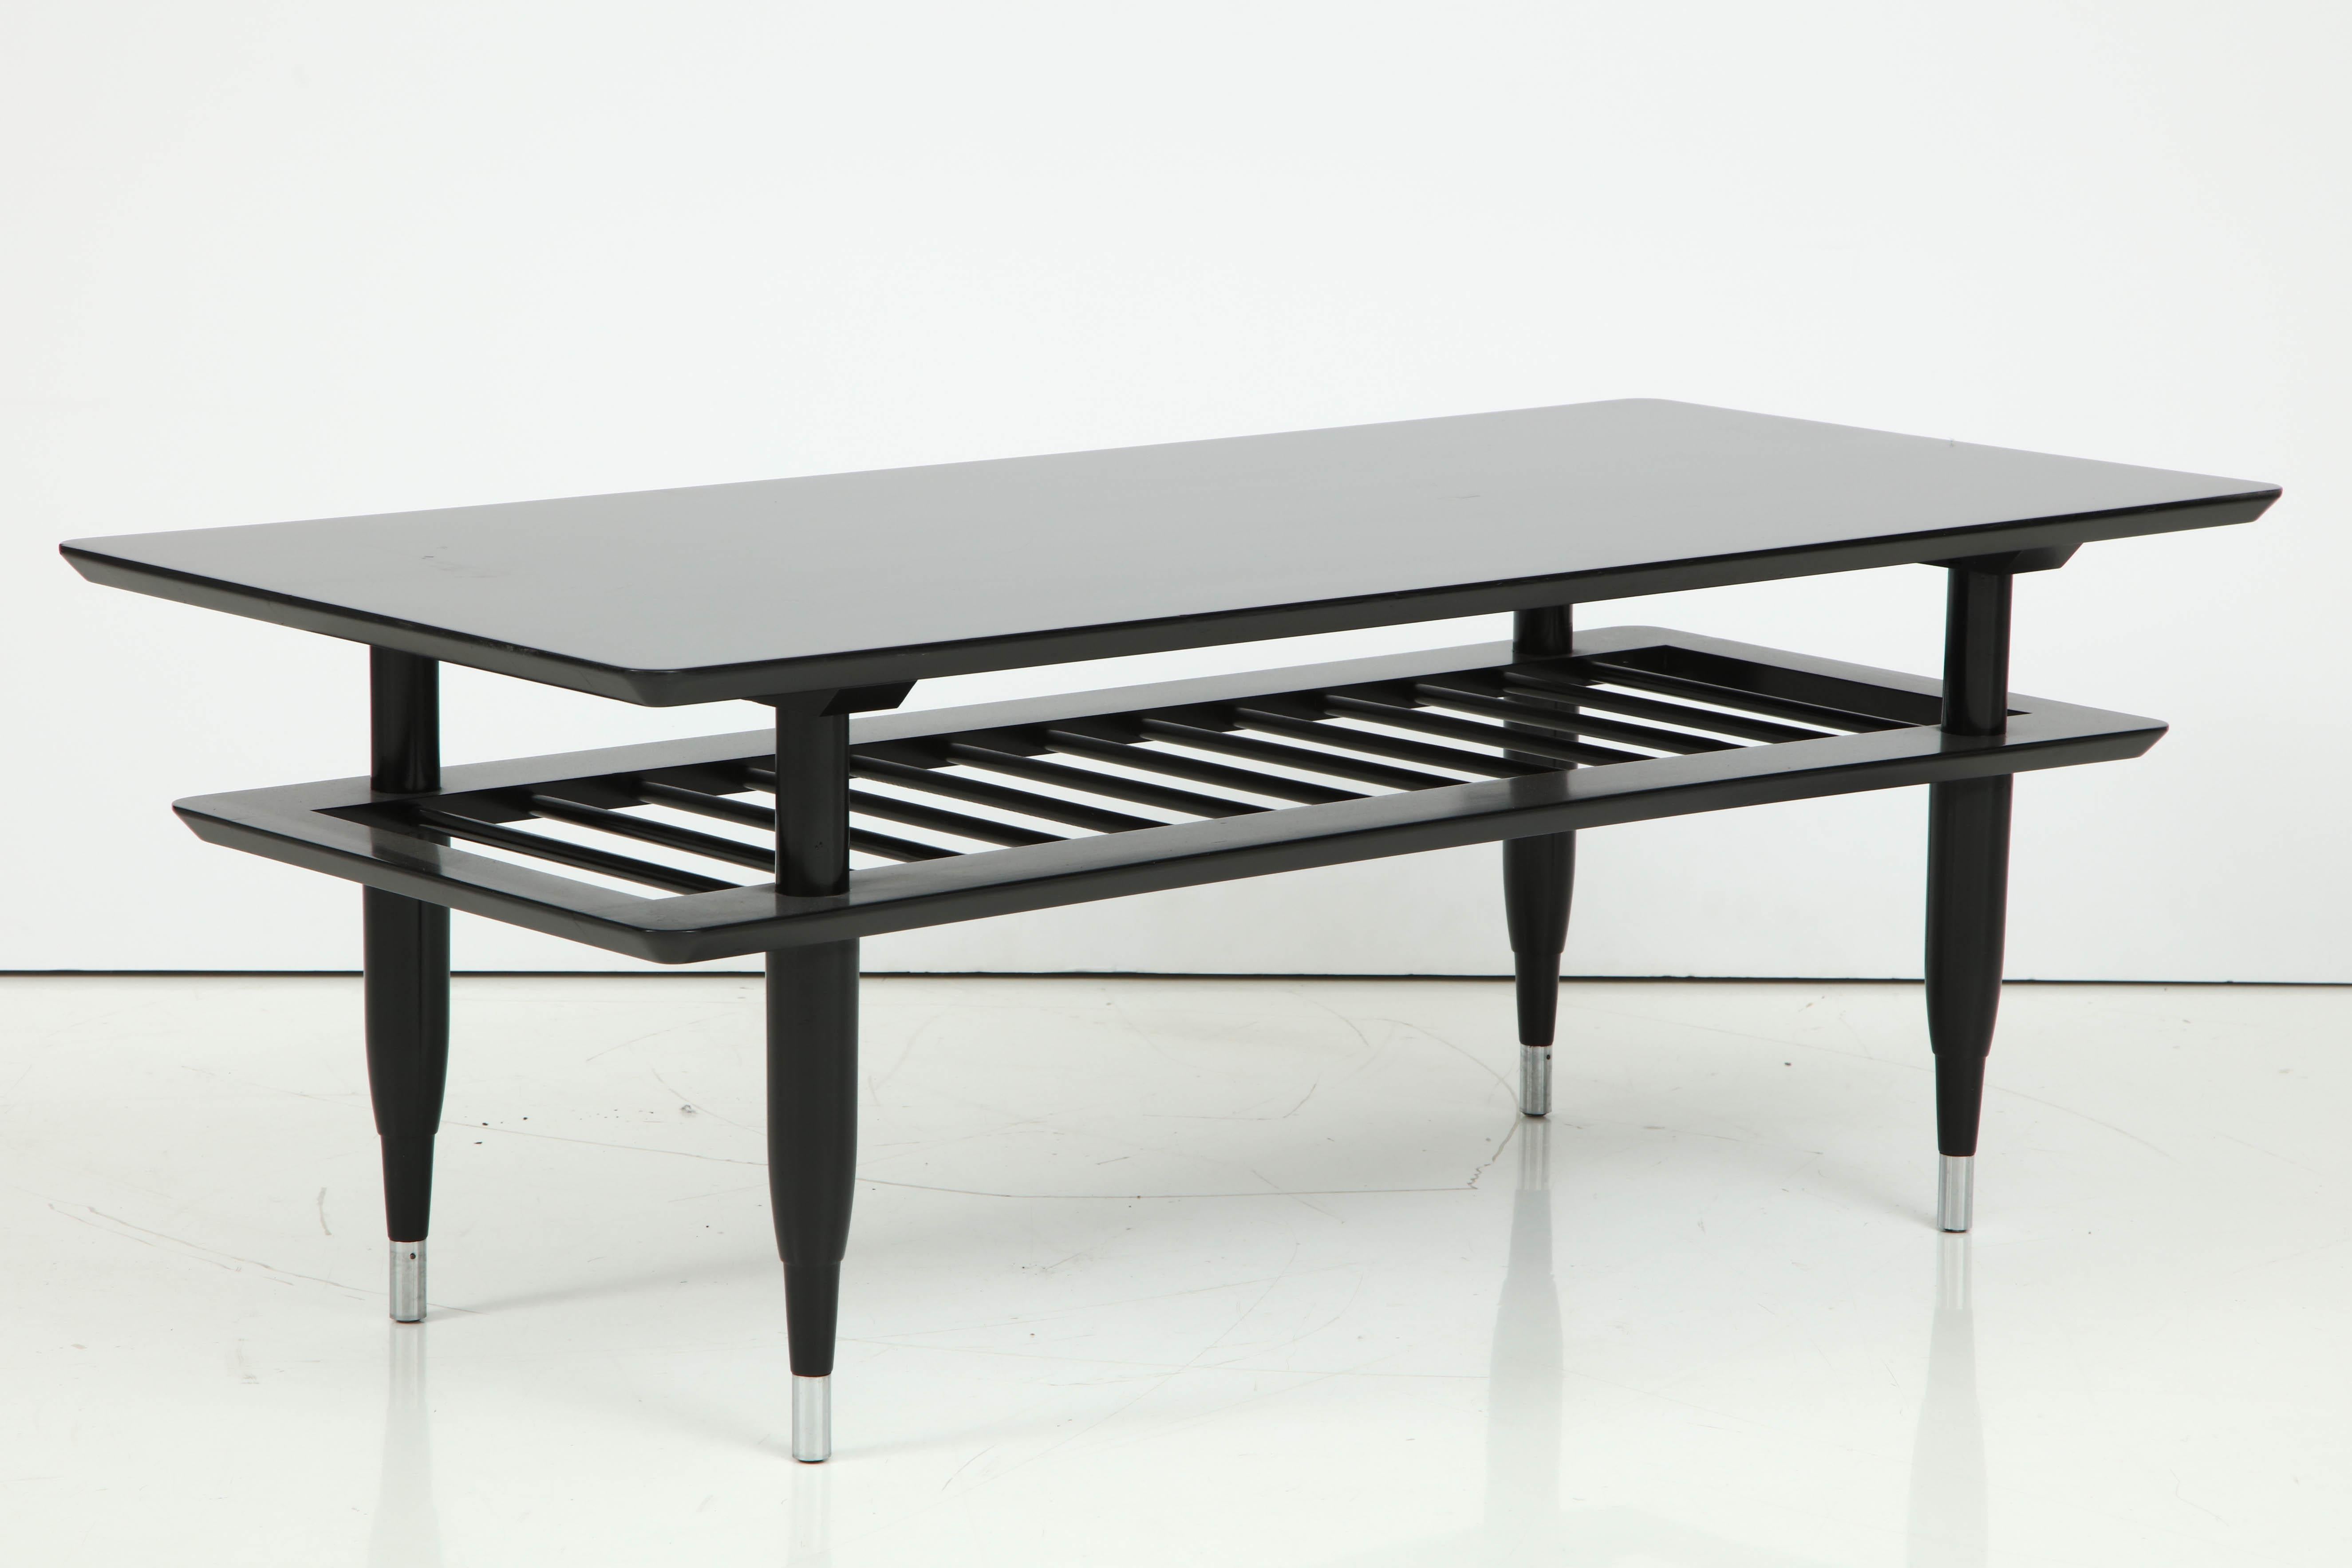 Mid-20th century ebonized two-tier cocktail table, slatted lower shelf, round tapered legs.